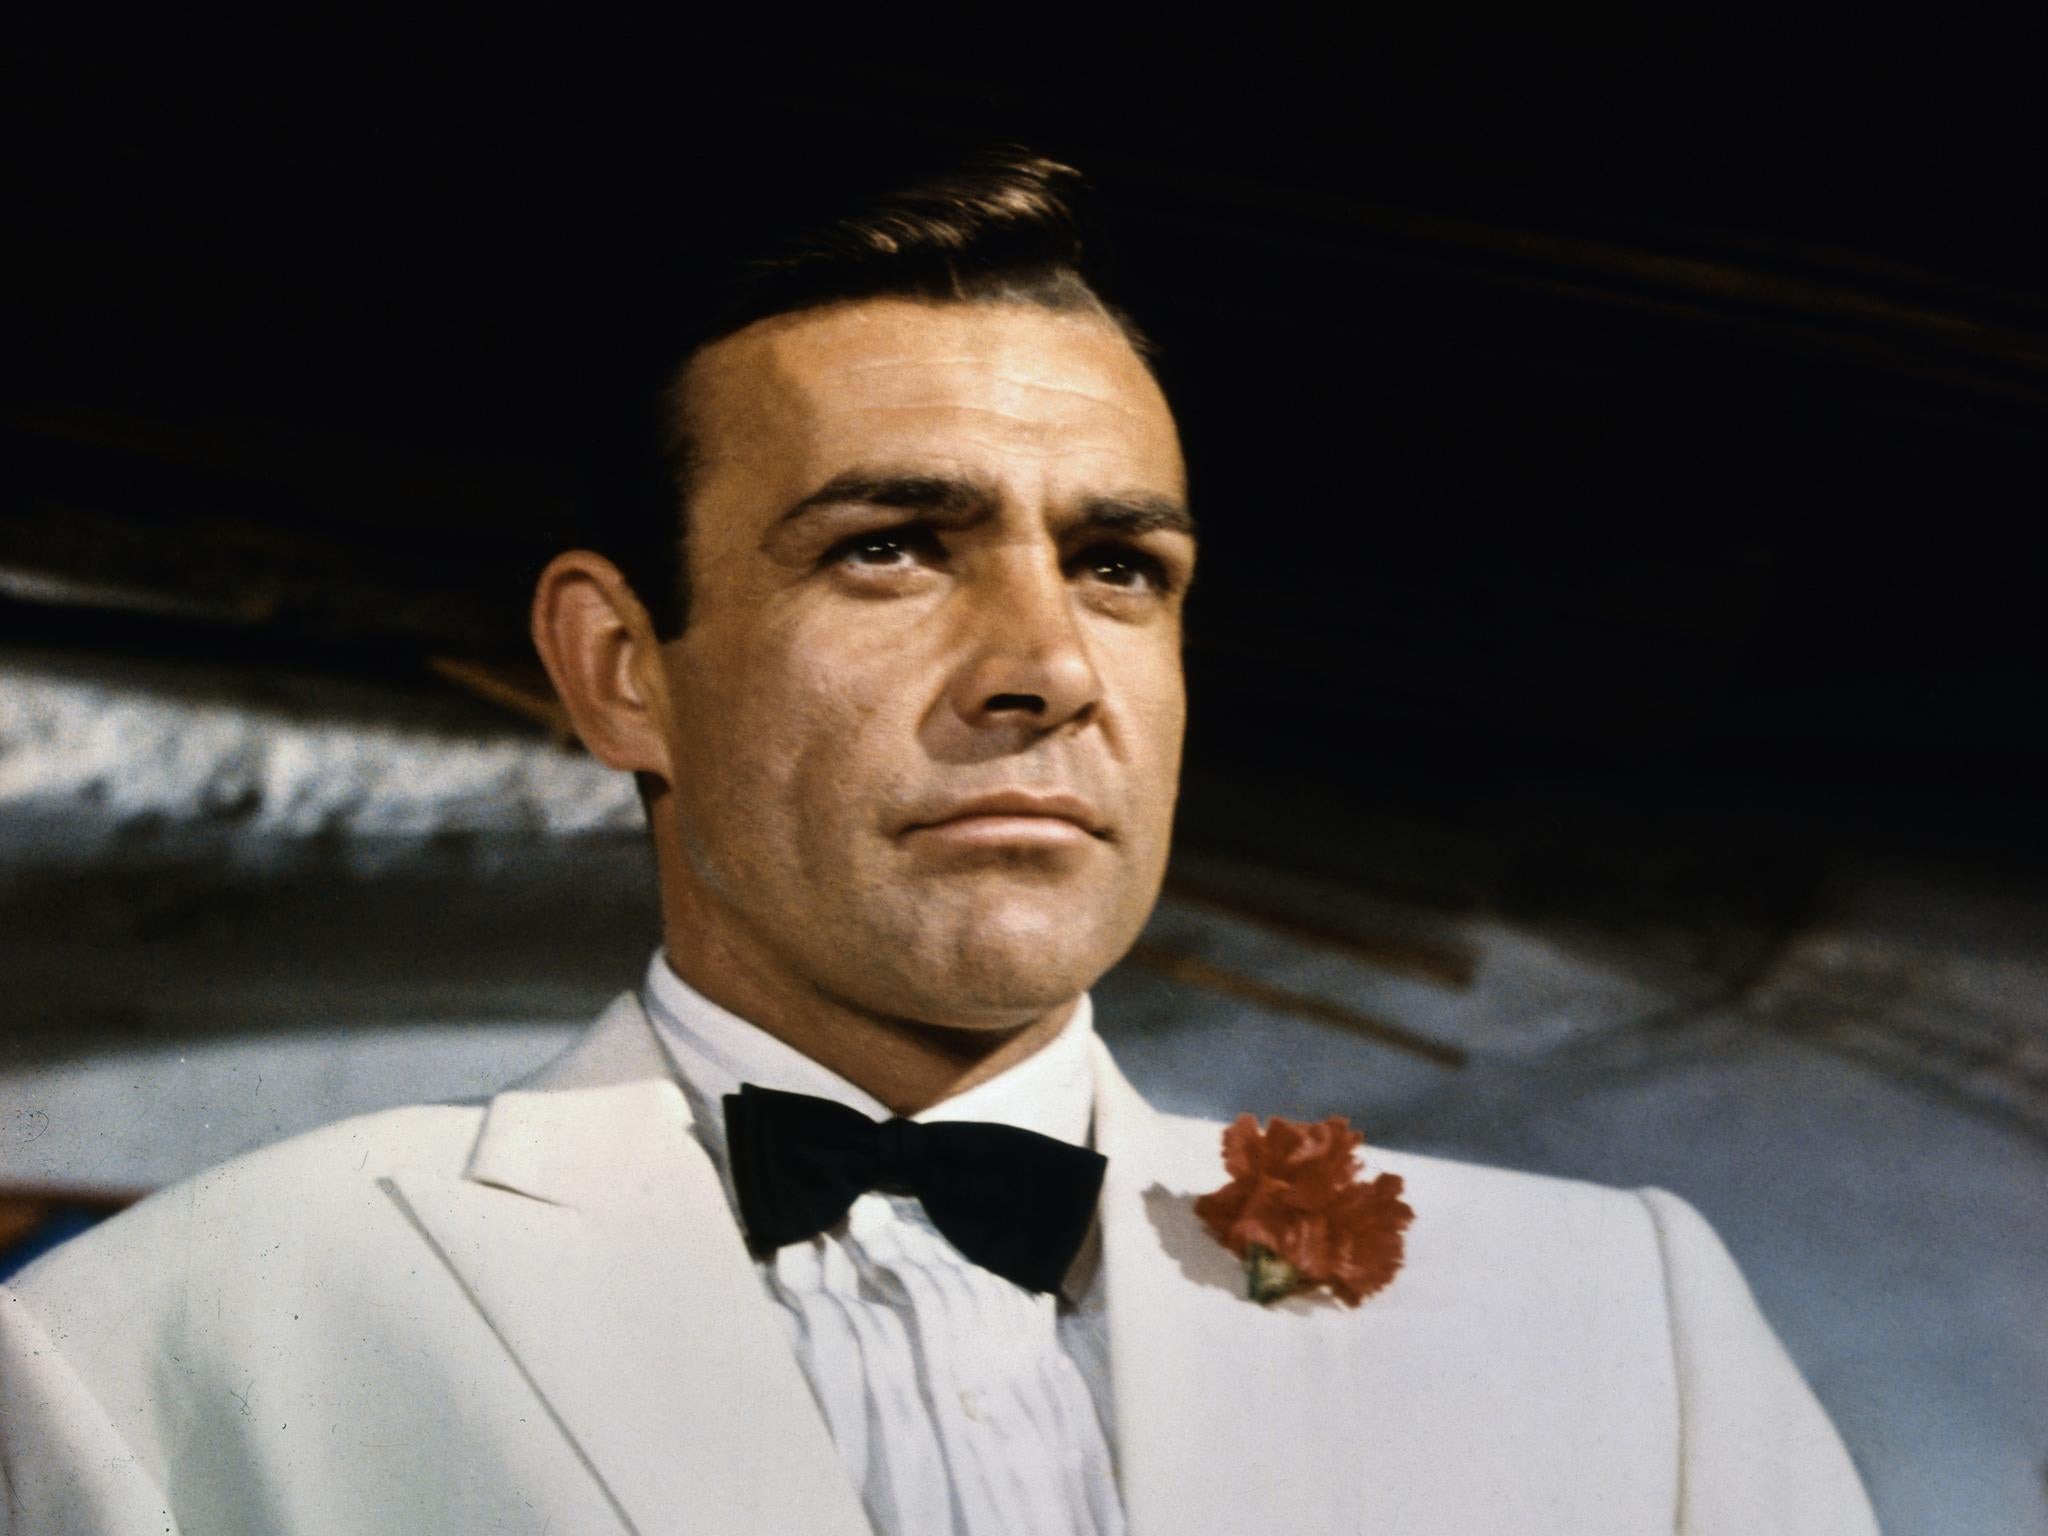 James Bond books rewritten to remove ‘offensive’ references